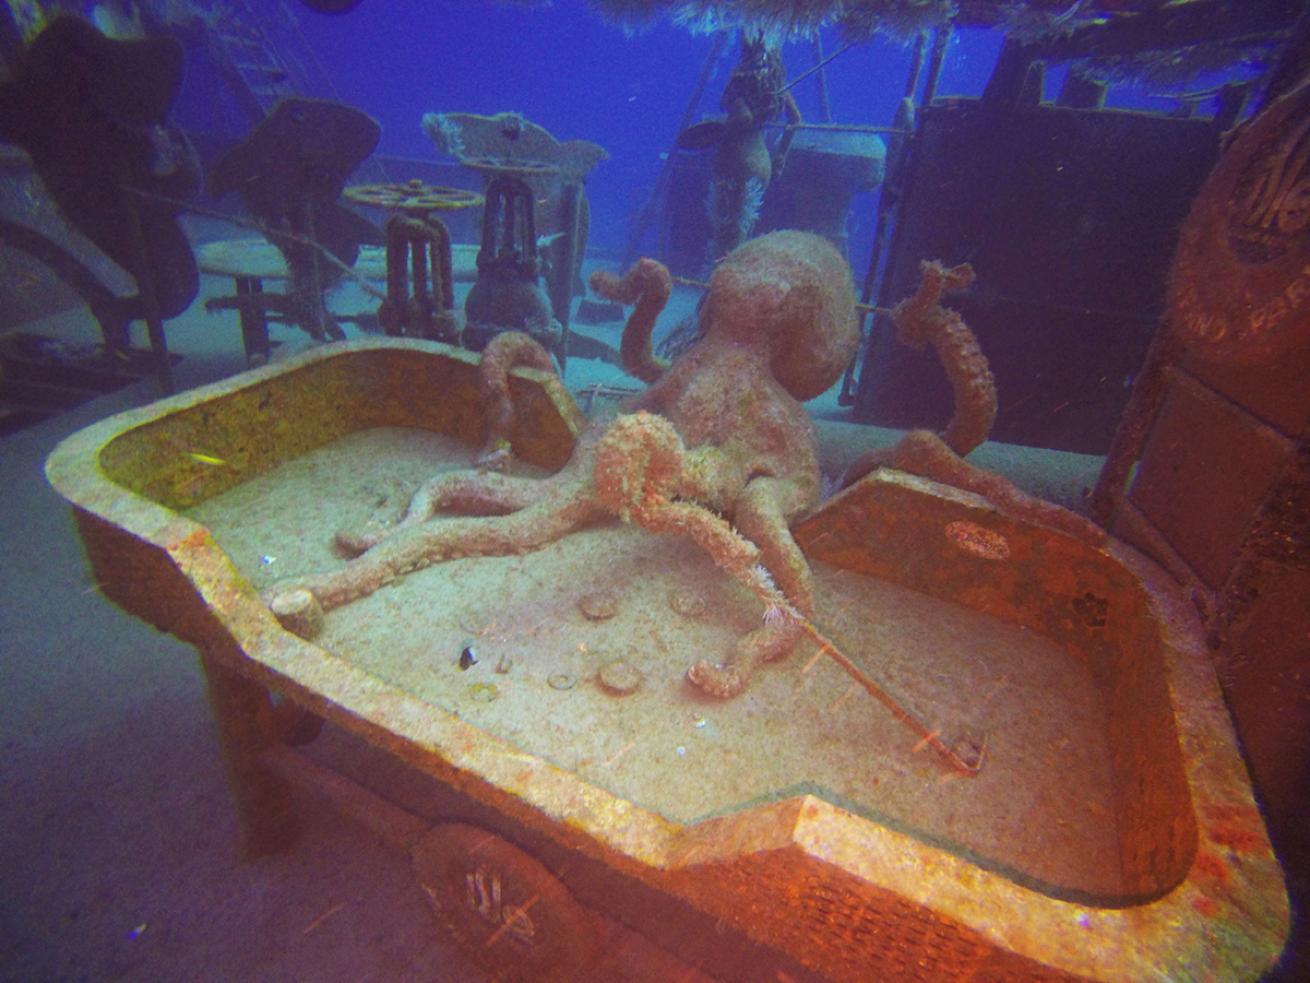 The statue of an octopus unfurls its tentacles across and around the edges of a craps table sitting on the deck of a shipwreck